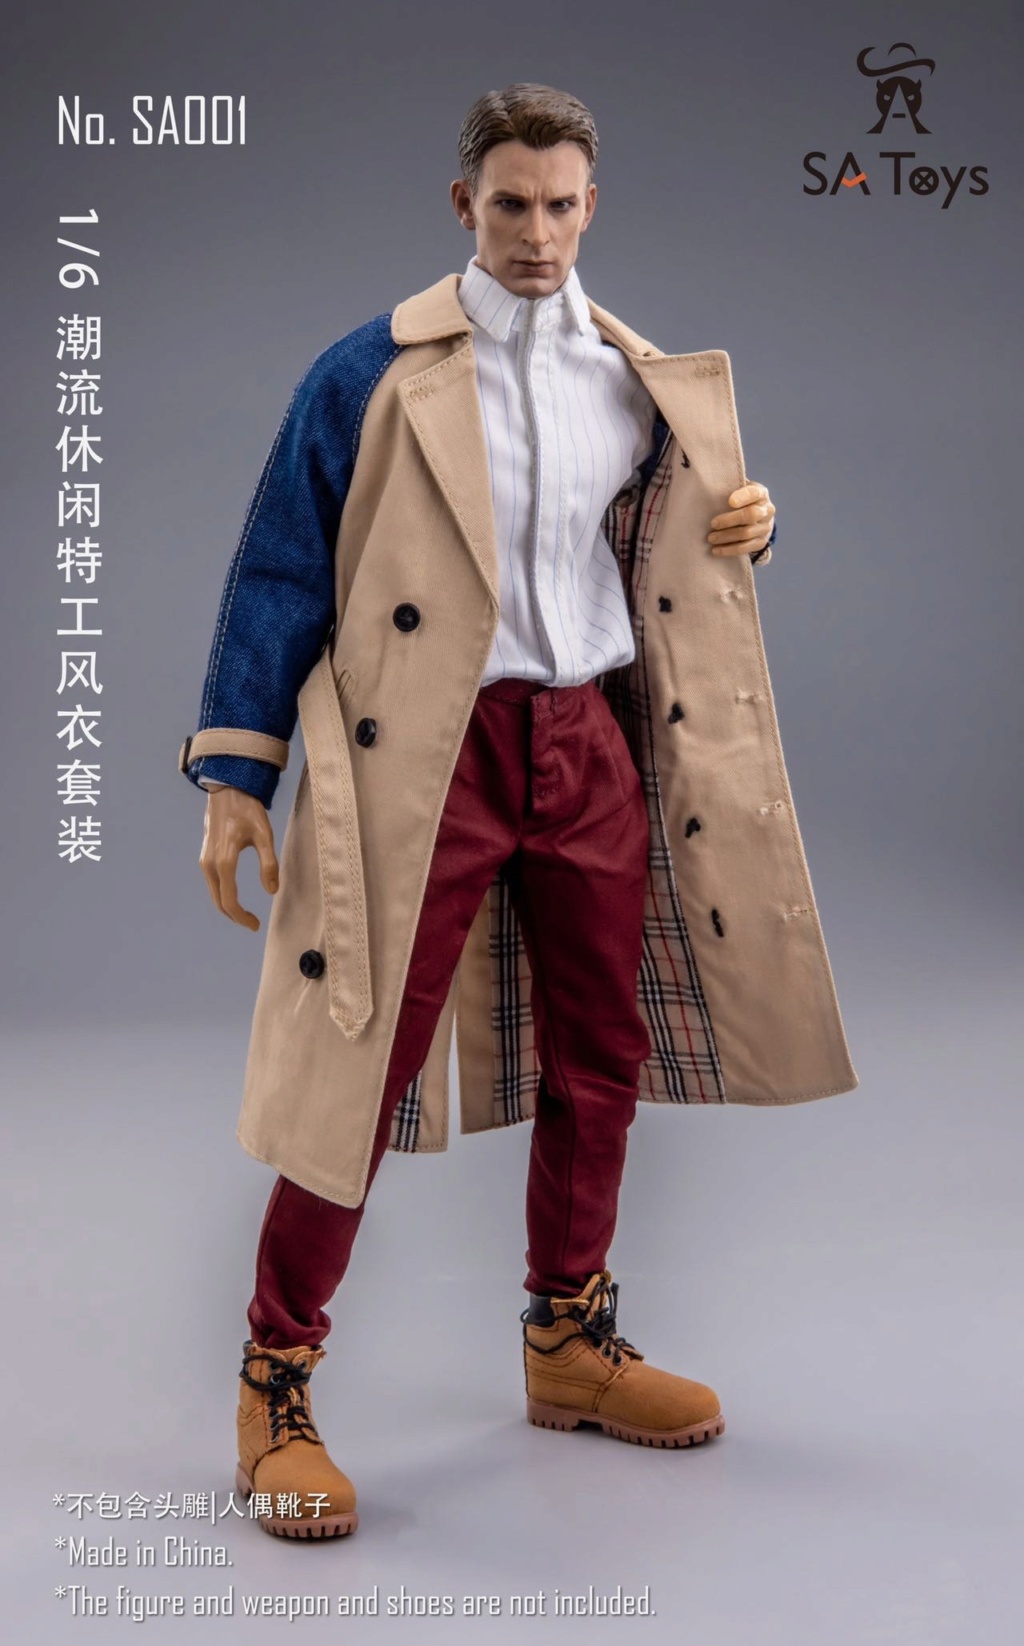 CasualTrenchCoatSet - NEW PRODUCT: SA Toys: 1/6 Trend Casual Agent Trench coat set (SA001) 15314111